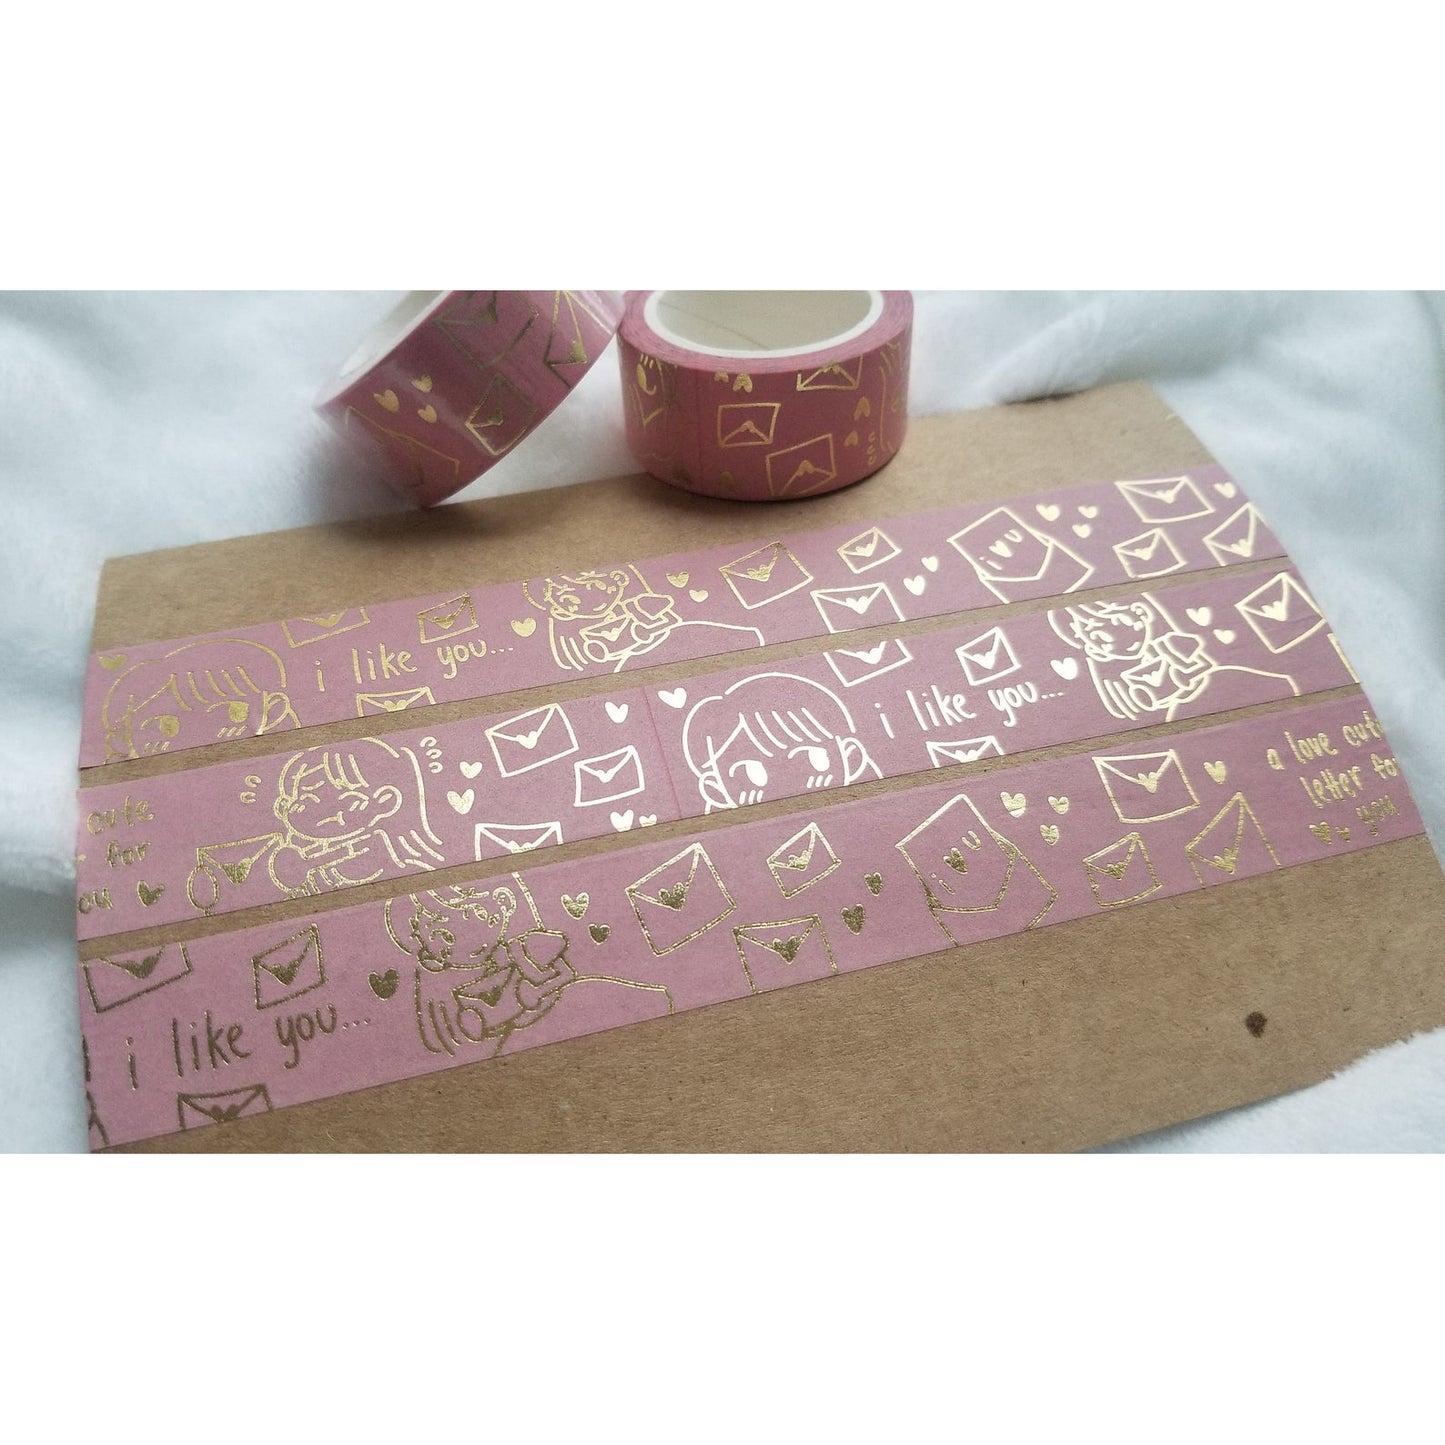 Rose pink with gold foil washi tape design of hearts and envelopes with a blushing person. Three strips of the tape on thin board on a white blanket with two full rolls of tape.